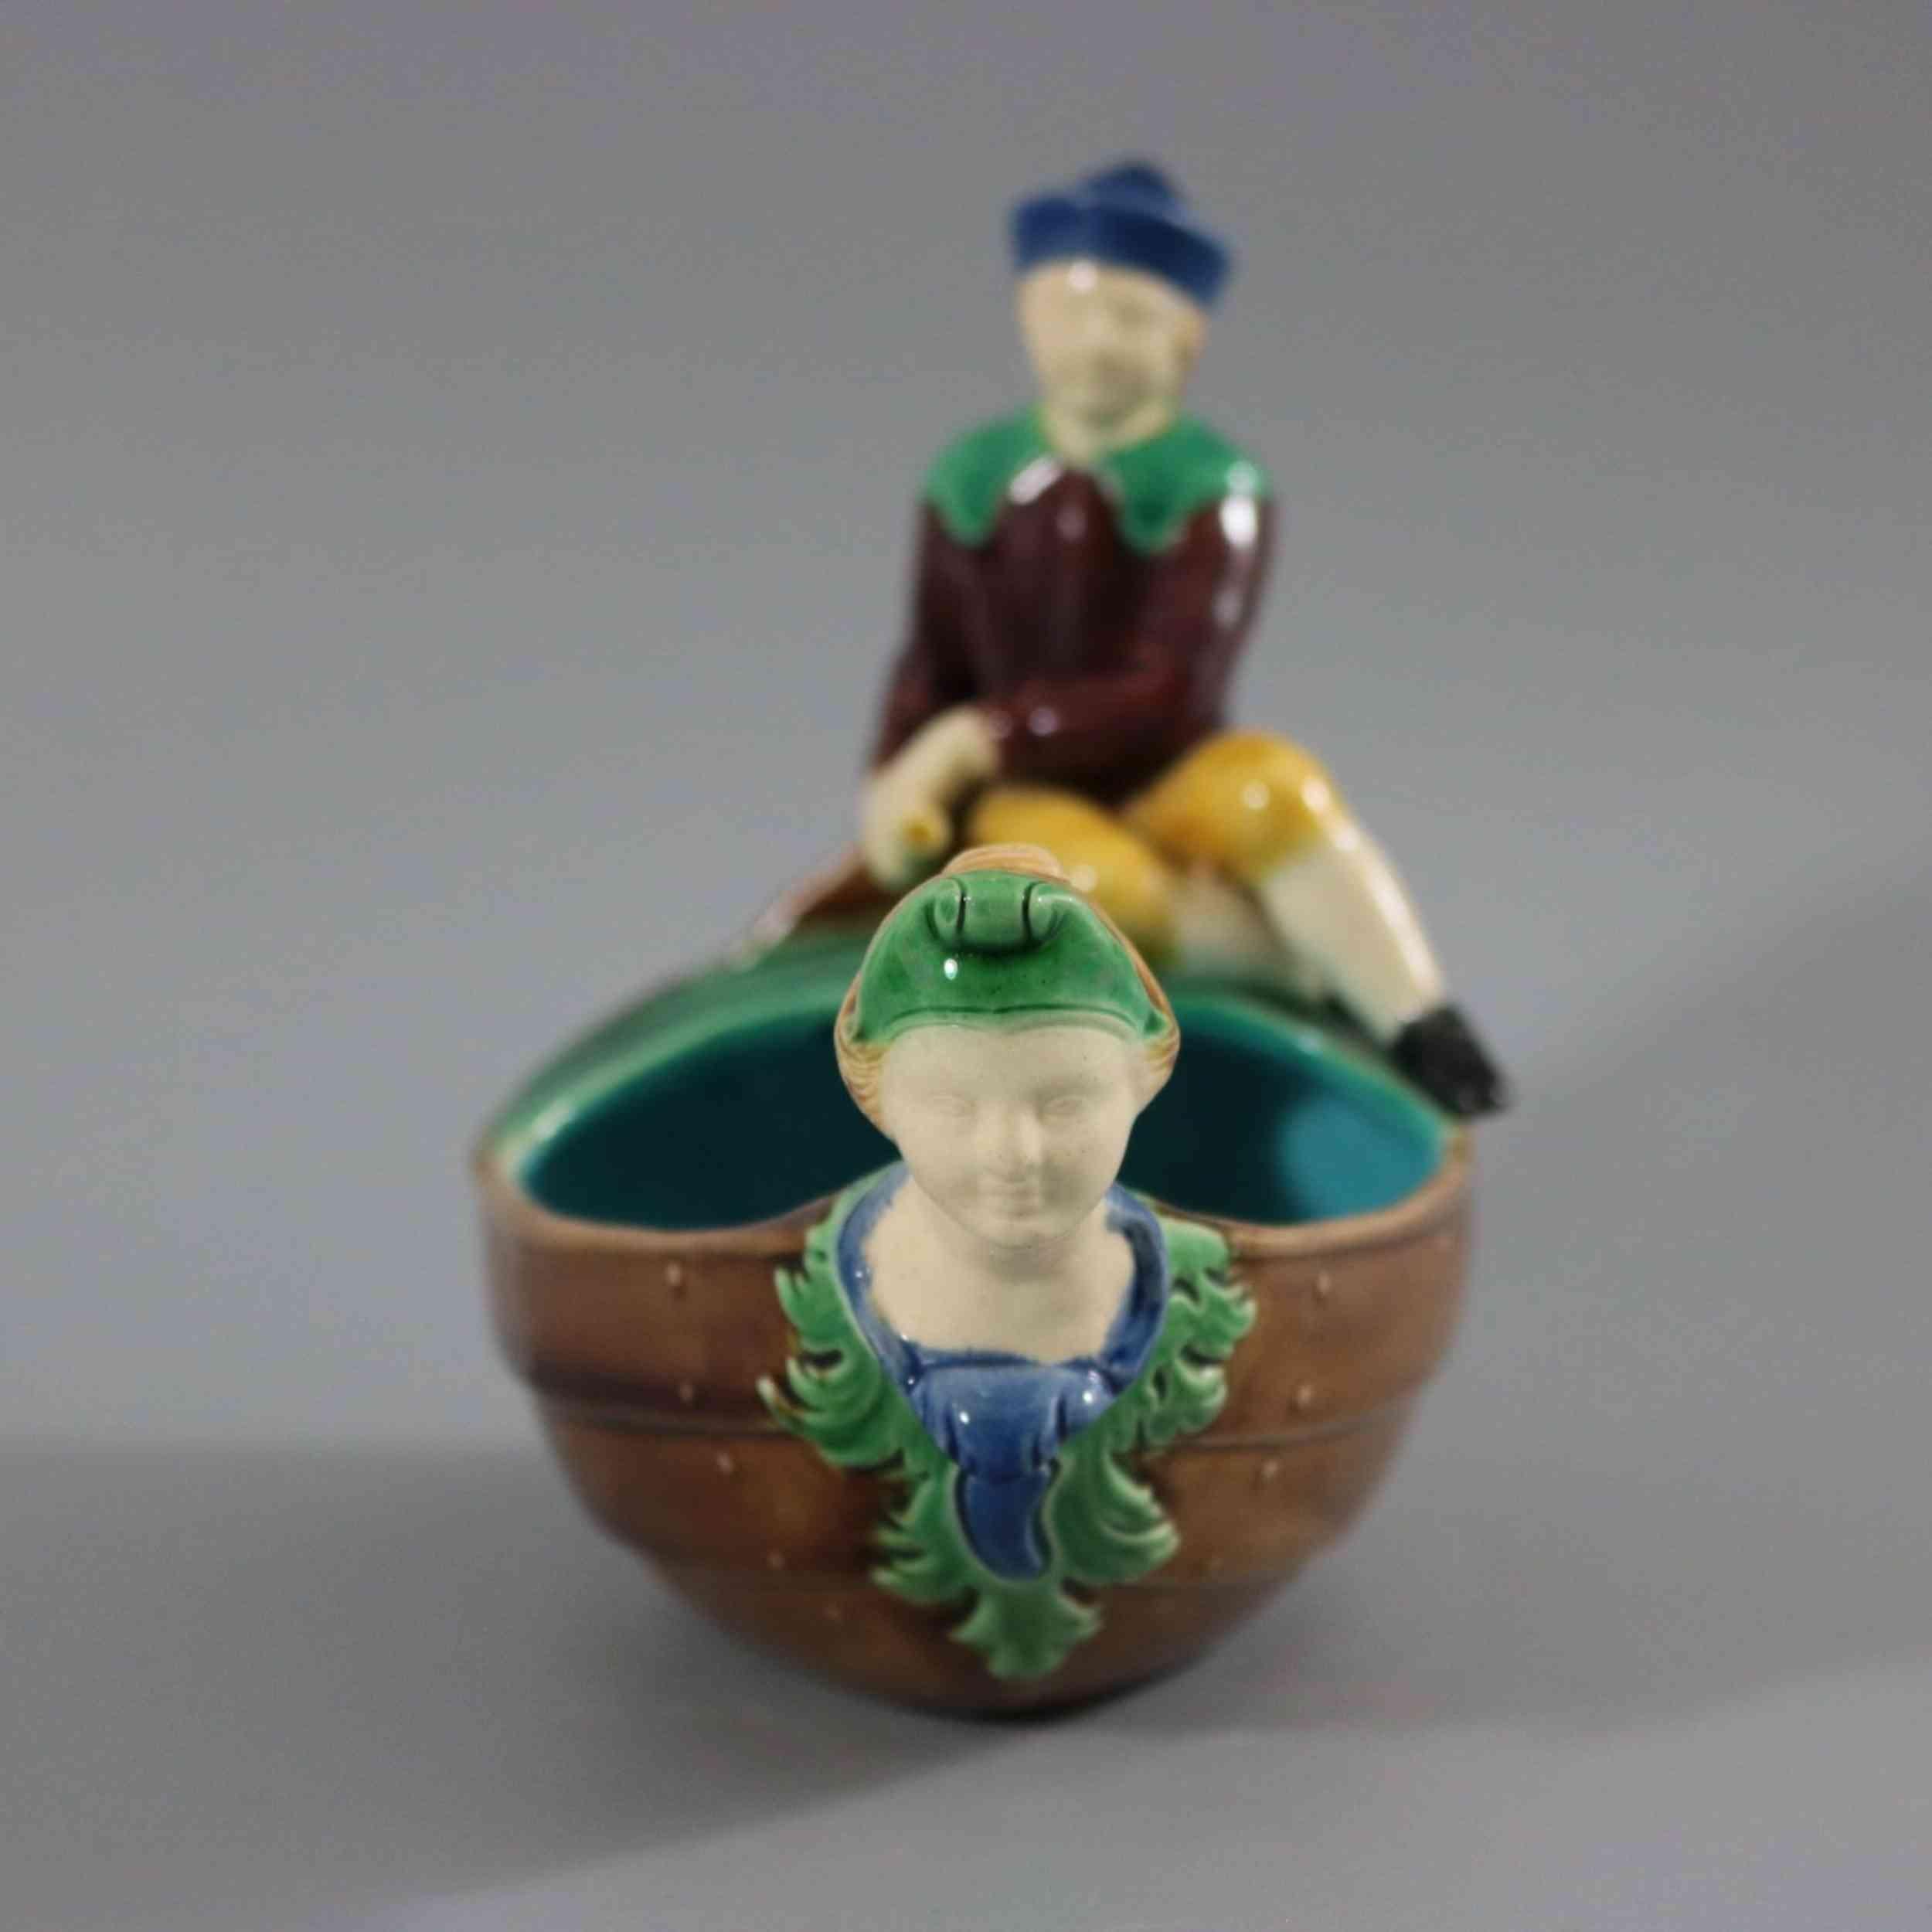 Minton Majolica dish which features a boat with a boy sitting on the back, steering the rudder. A woman's bust figurehead at the front of the boat. Colouration: brown, green, turquoise, are predominant. The piece bears maker's marks for the Minton